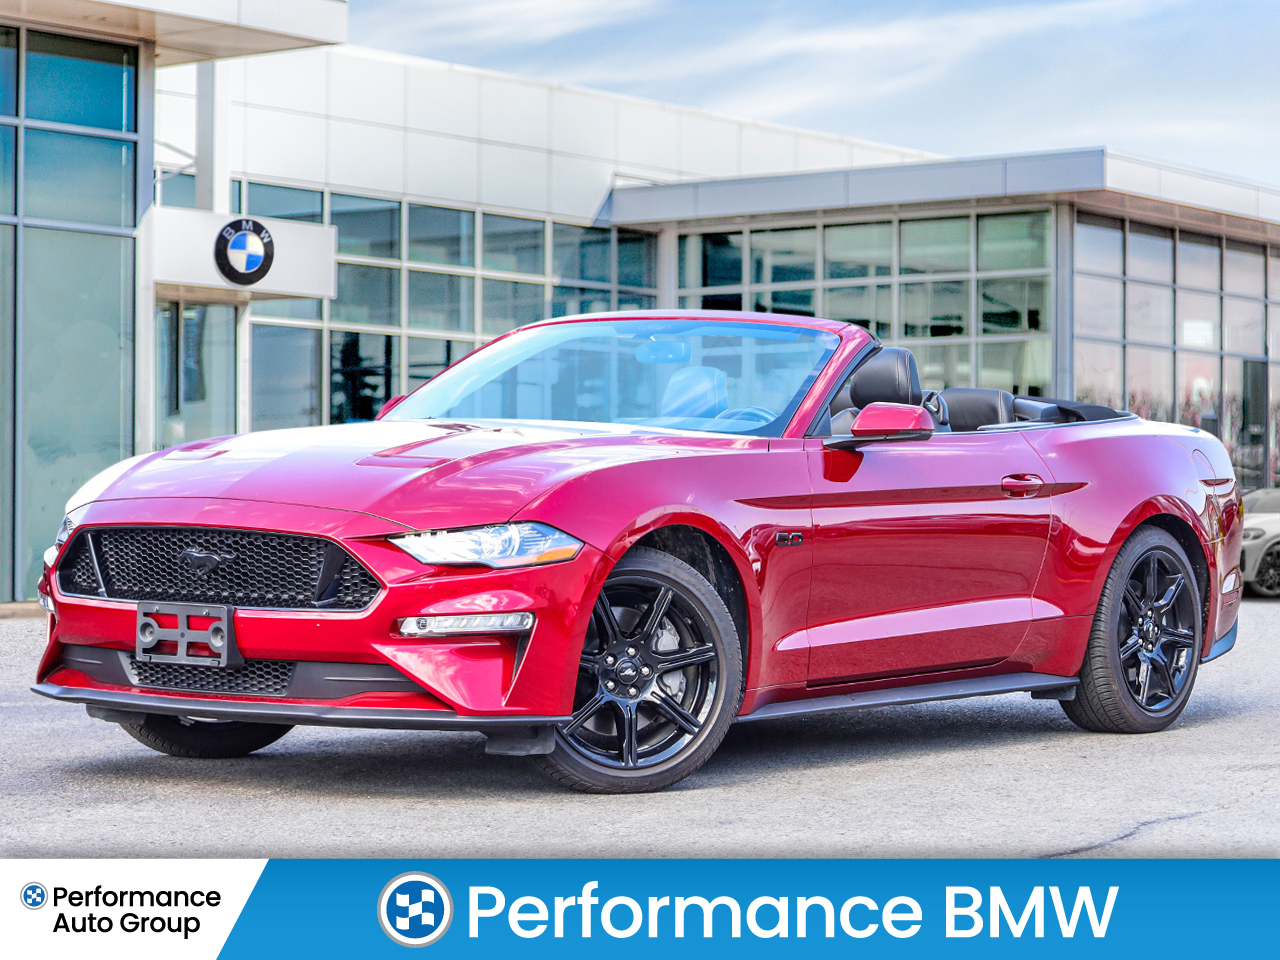 2019 Ford Mustang GT Premium Convertible- 10sp- 5.0L V8 14,000kms!